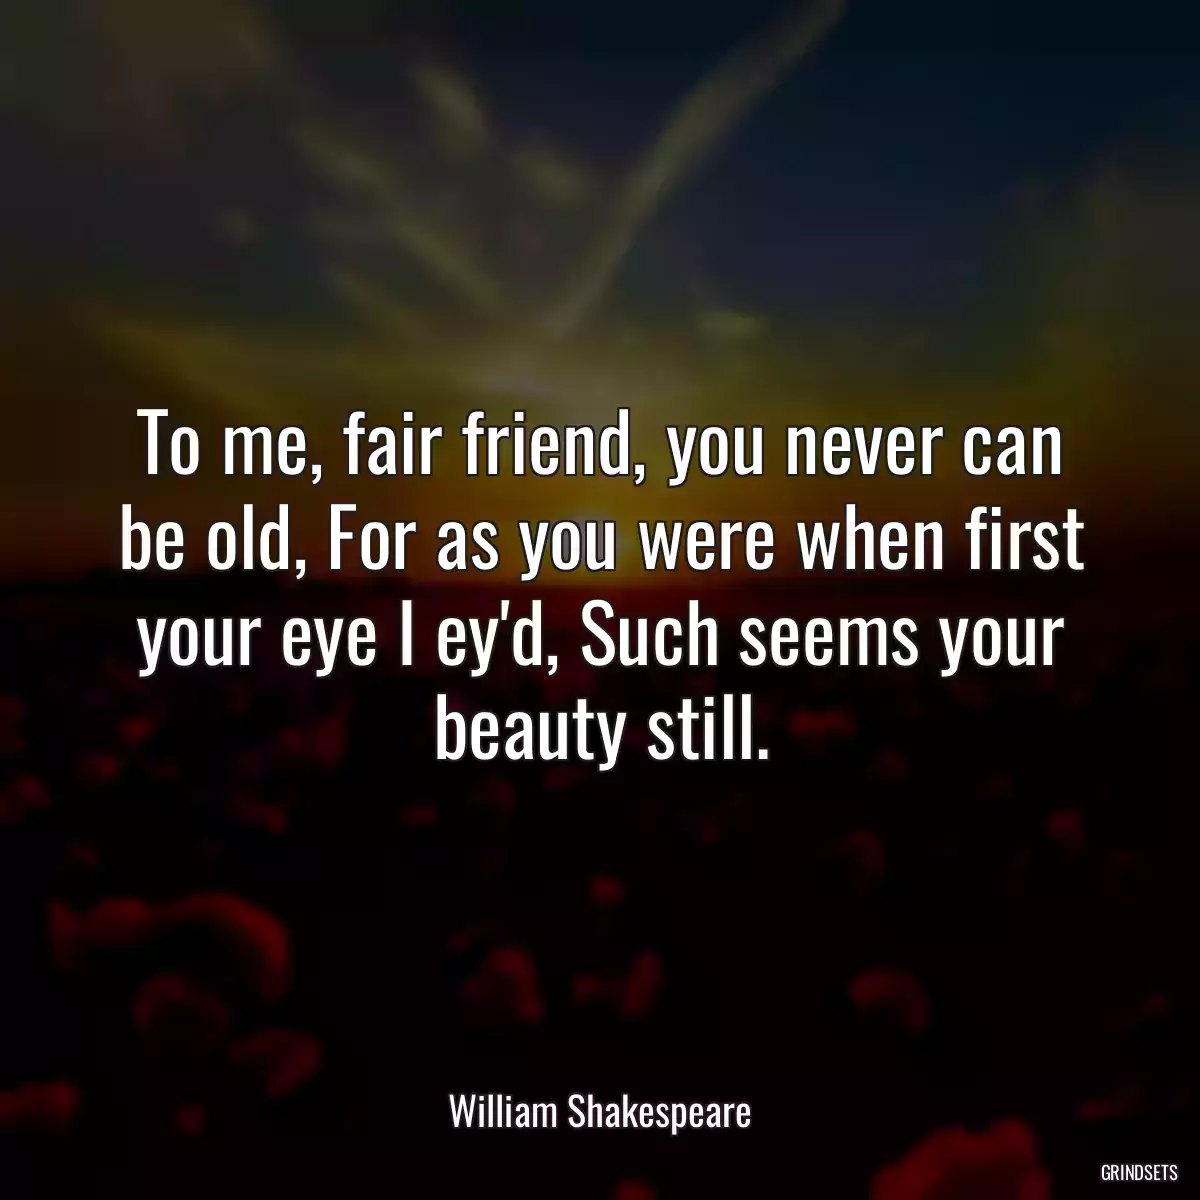 To me, fair friend, you never can be old, For as you were when first your eye I ey\'d, Such seems your beauty still.